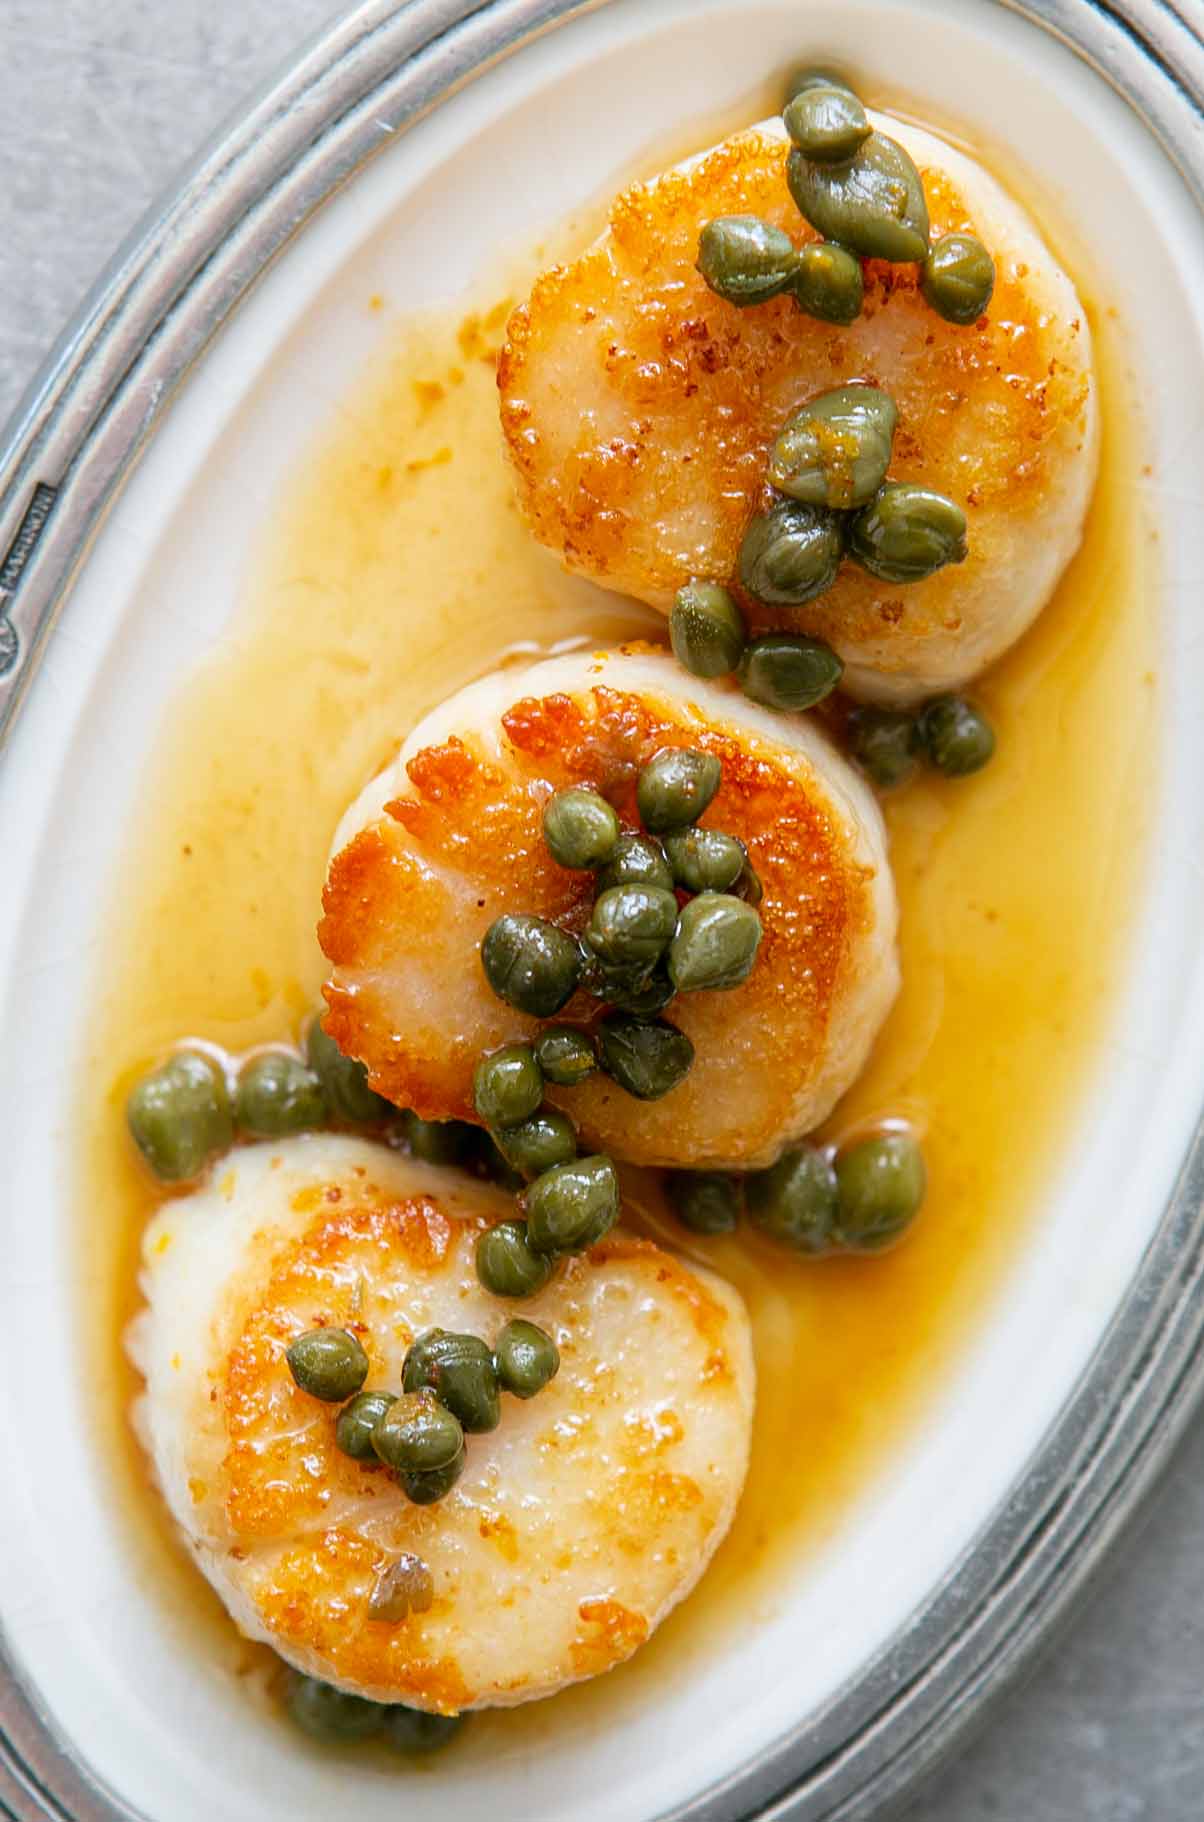 Seared Scallops With Brown Butter Caper Sauce